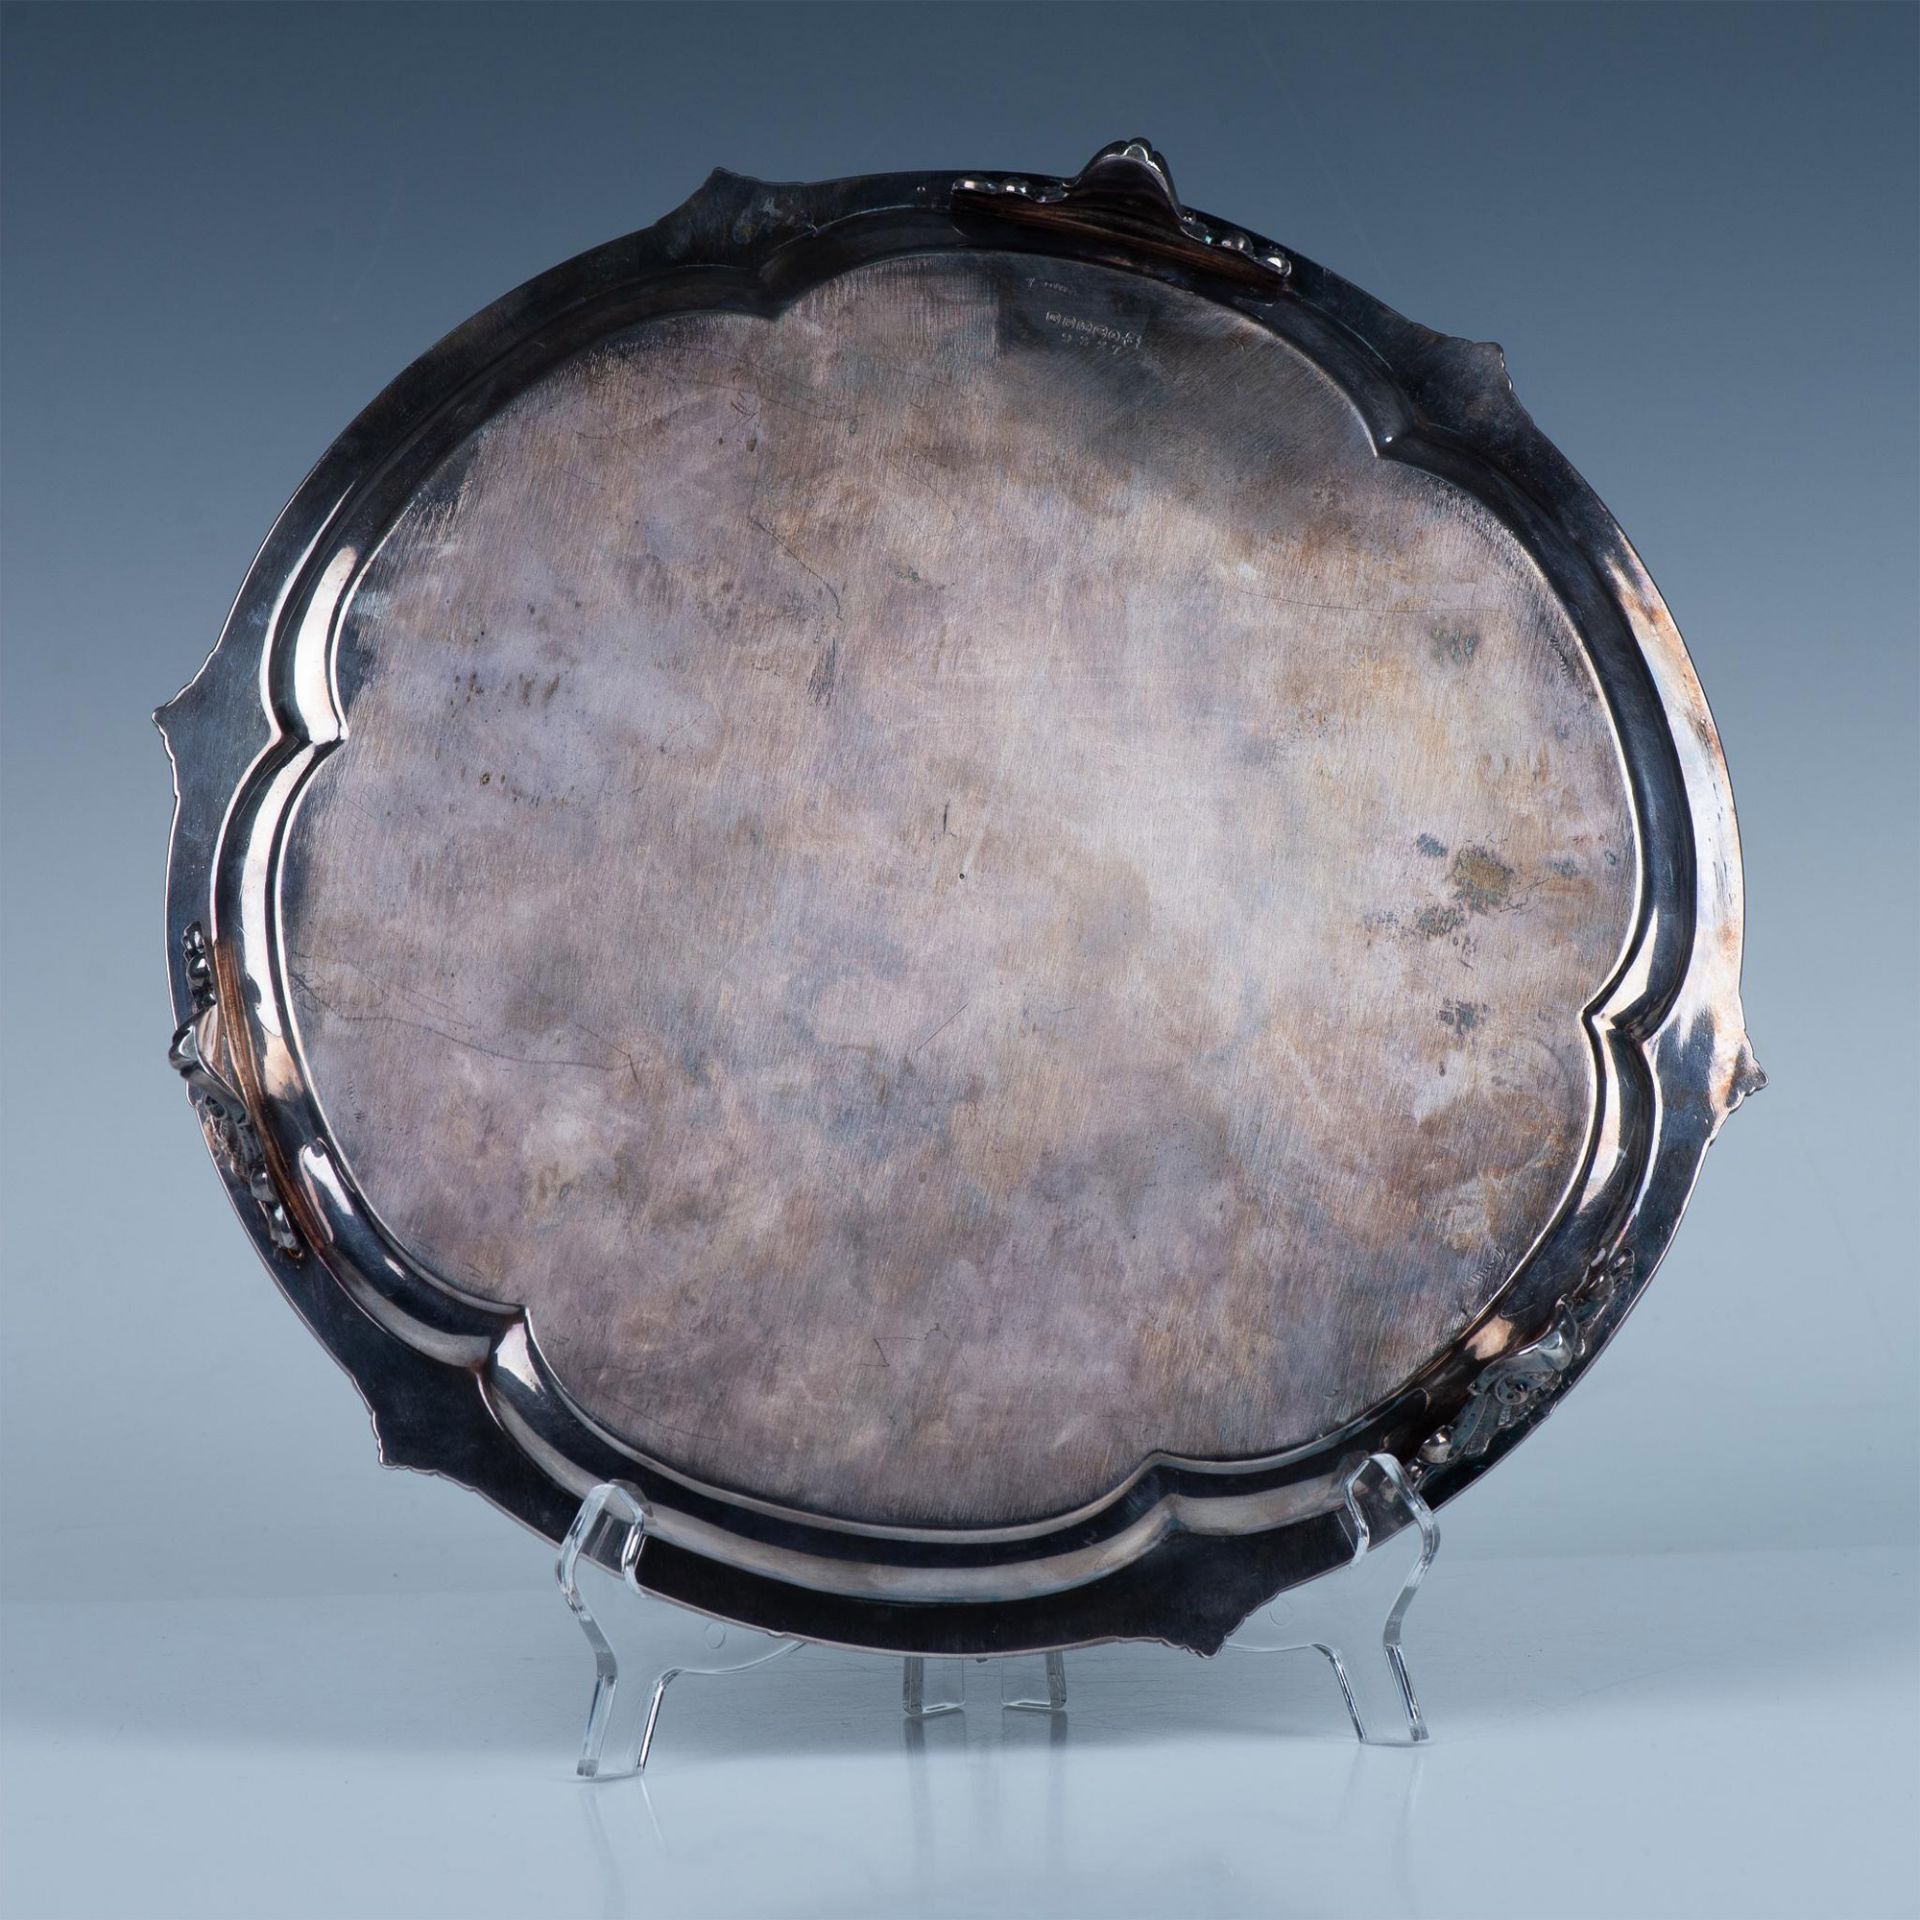 Martin Hall and Co. Silverplated Footed Tray - Image 4 of 6